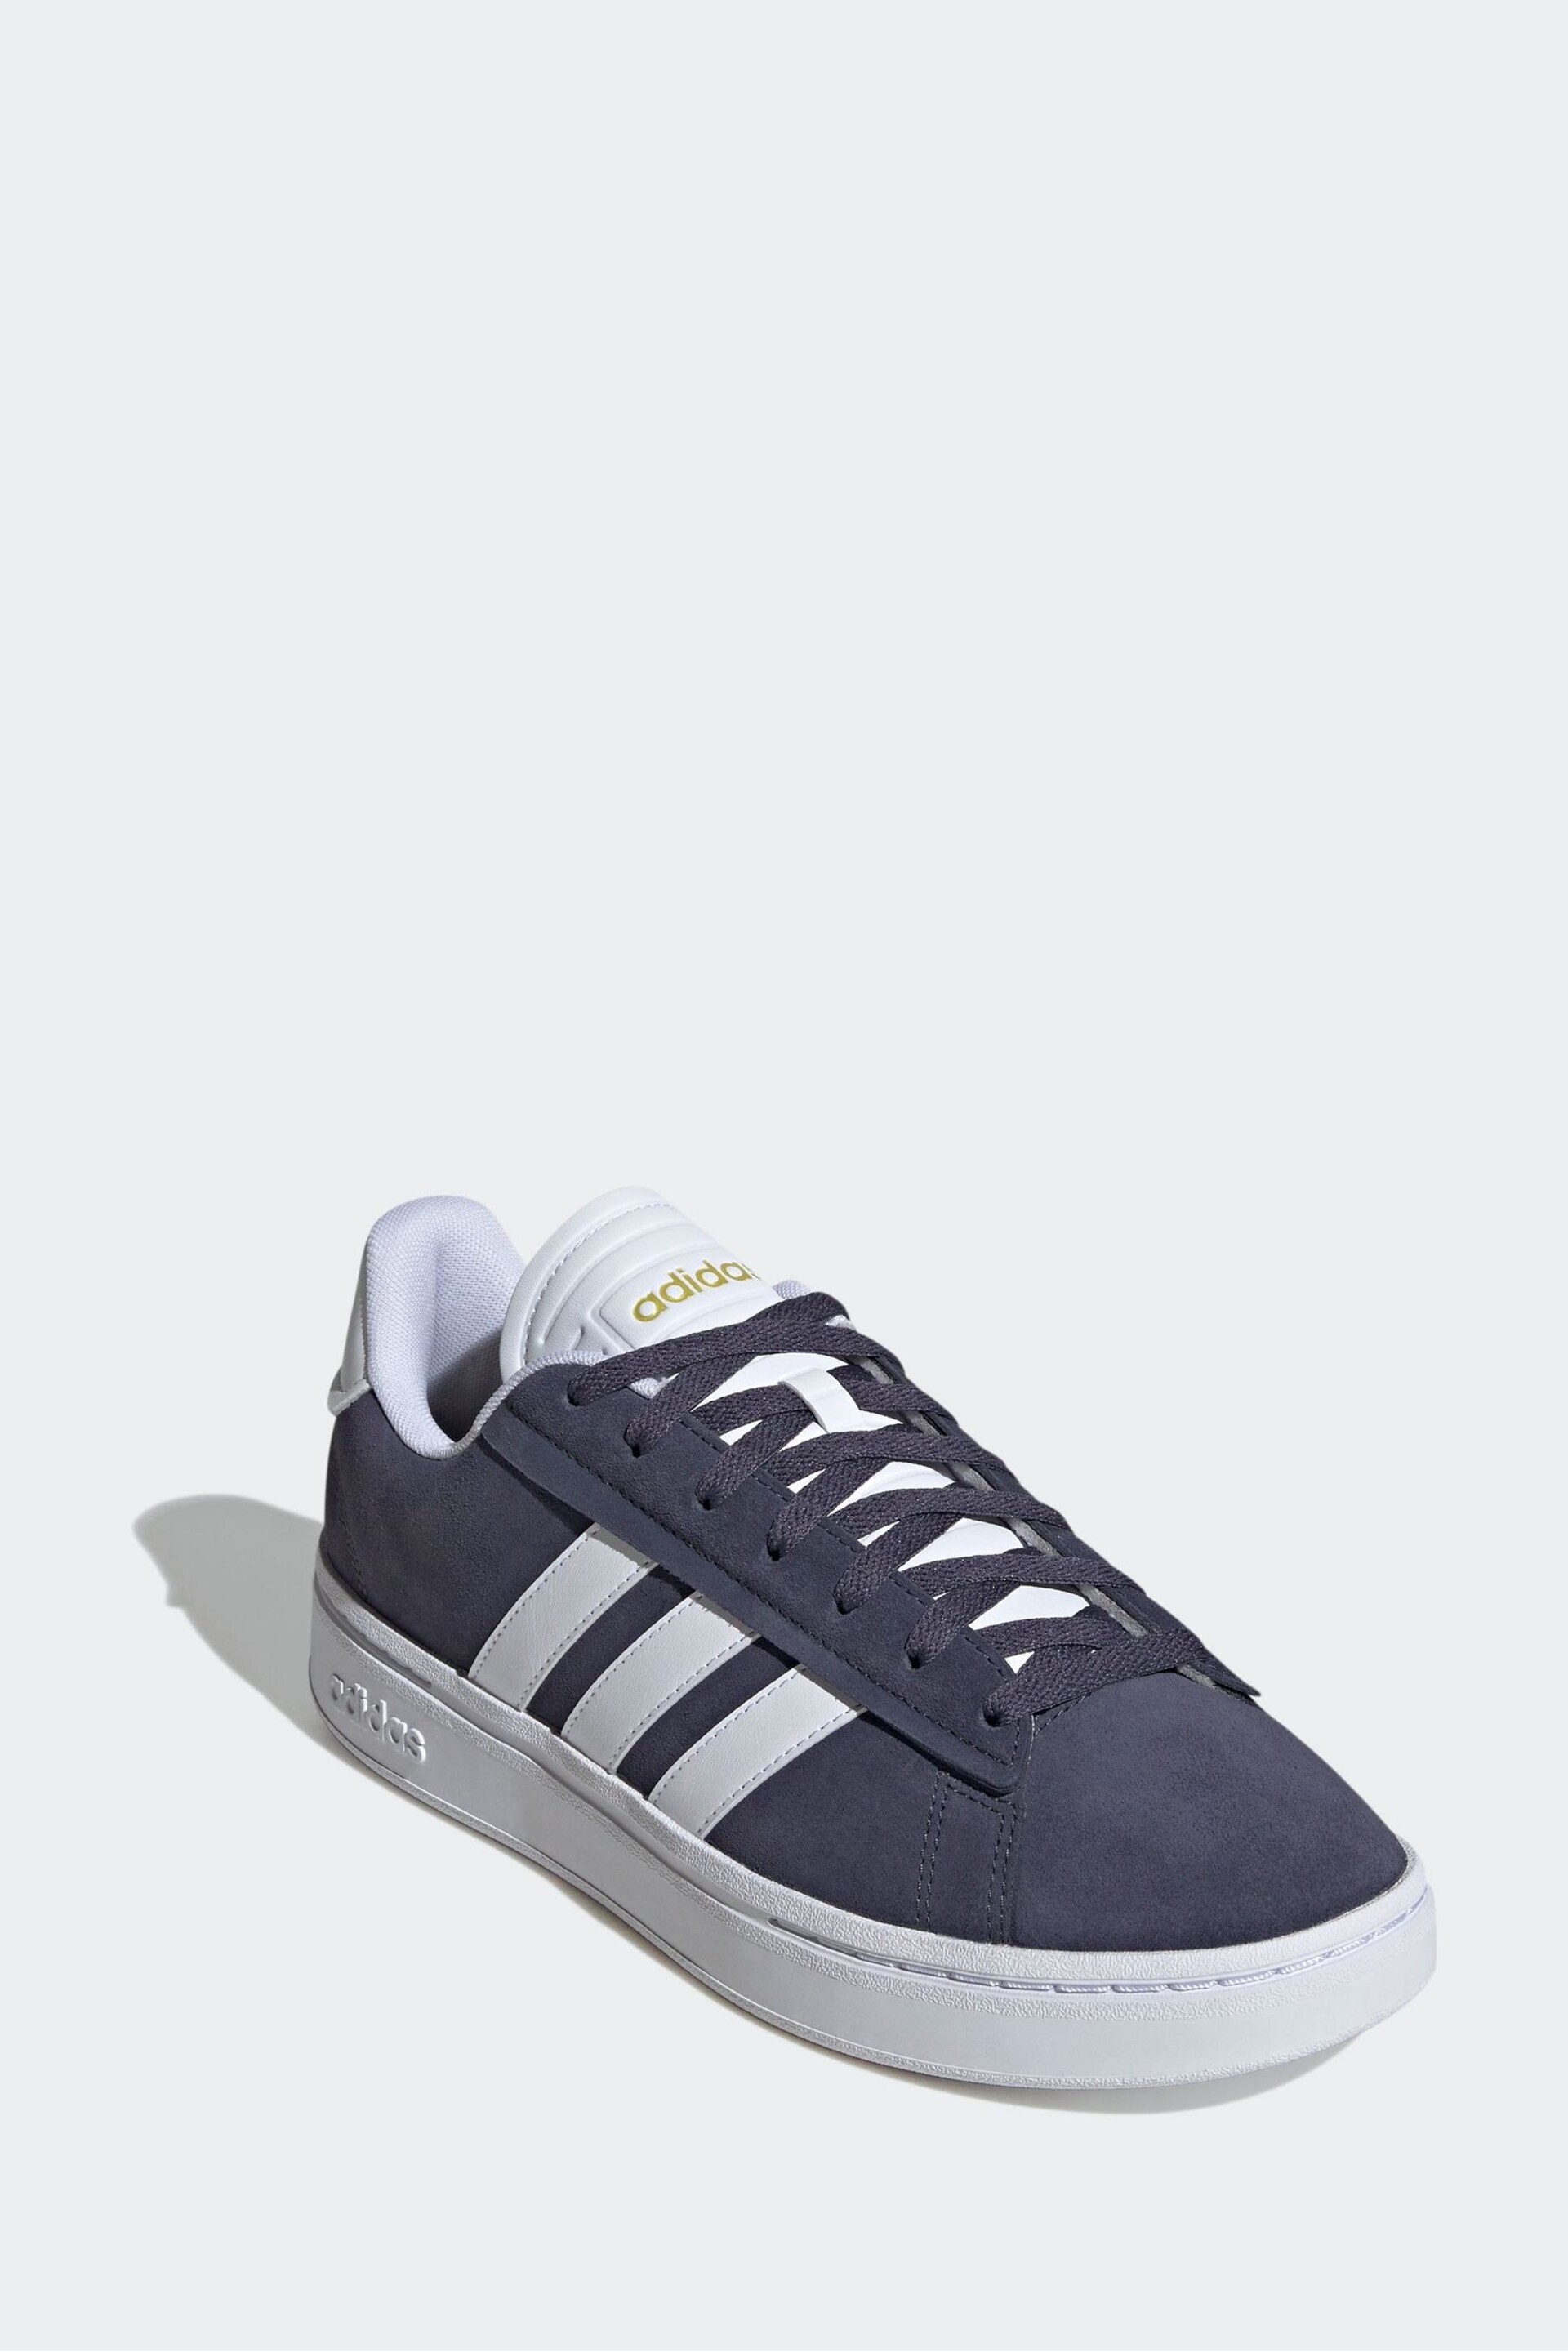 adidas Navy/White Sportswear Grand Court Alpha Trainers - Image 4 of 8